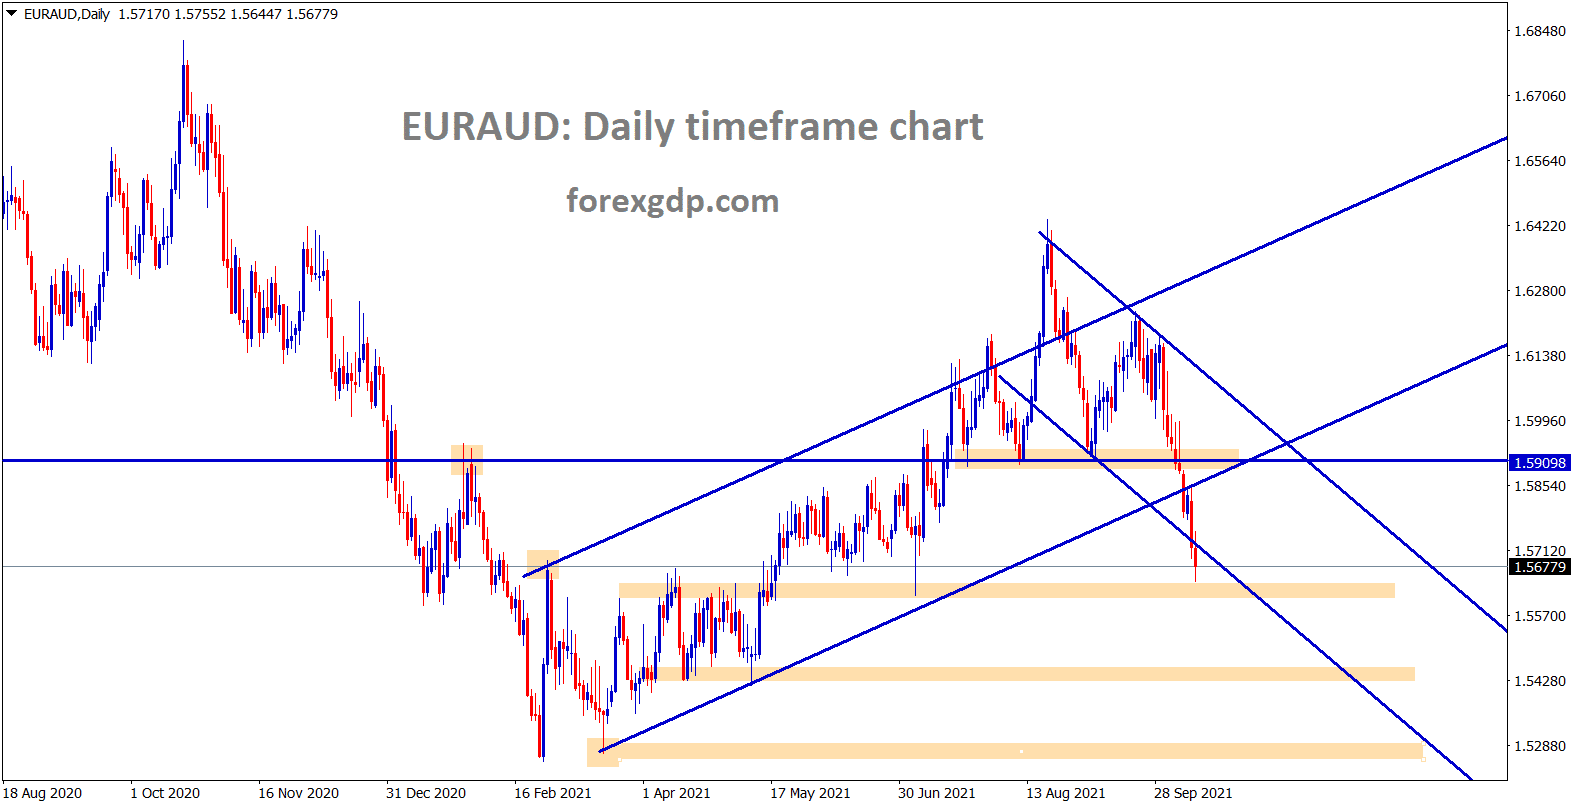 EURAUD is falling down continuously breaking the lows